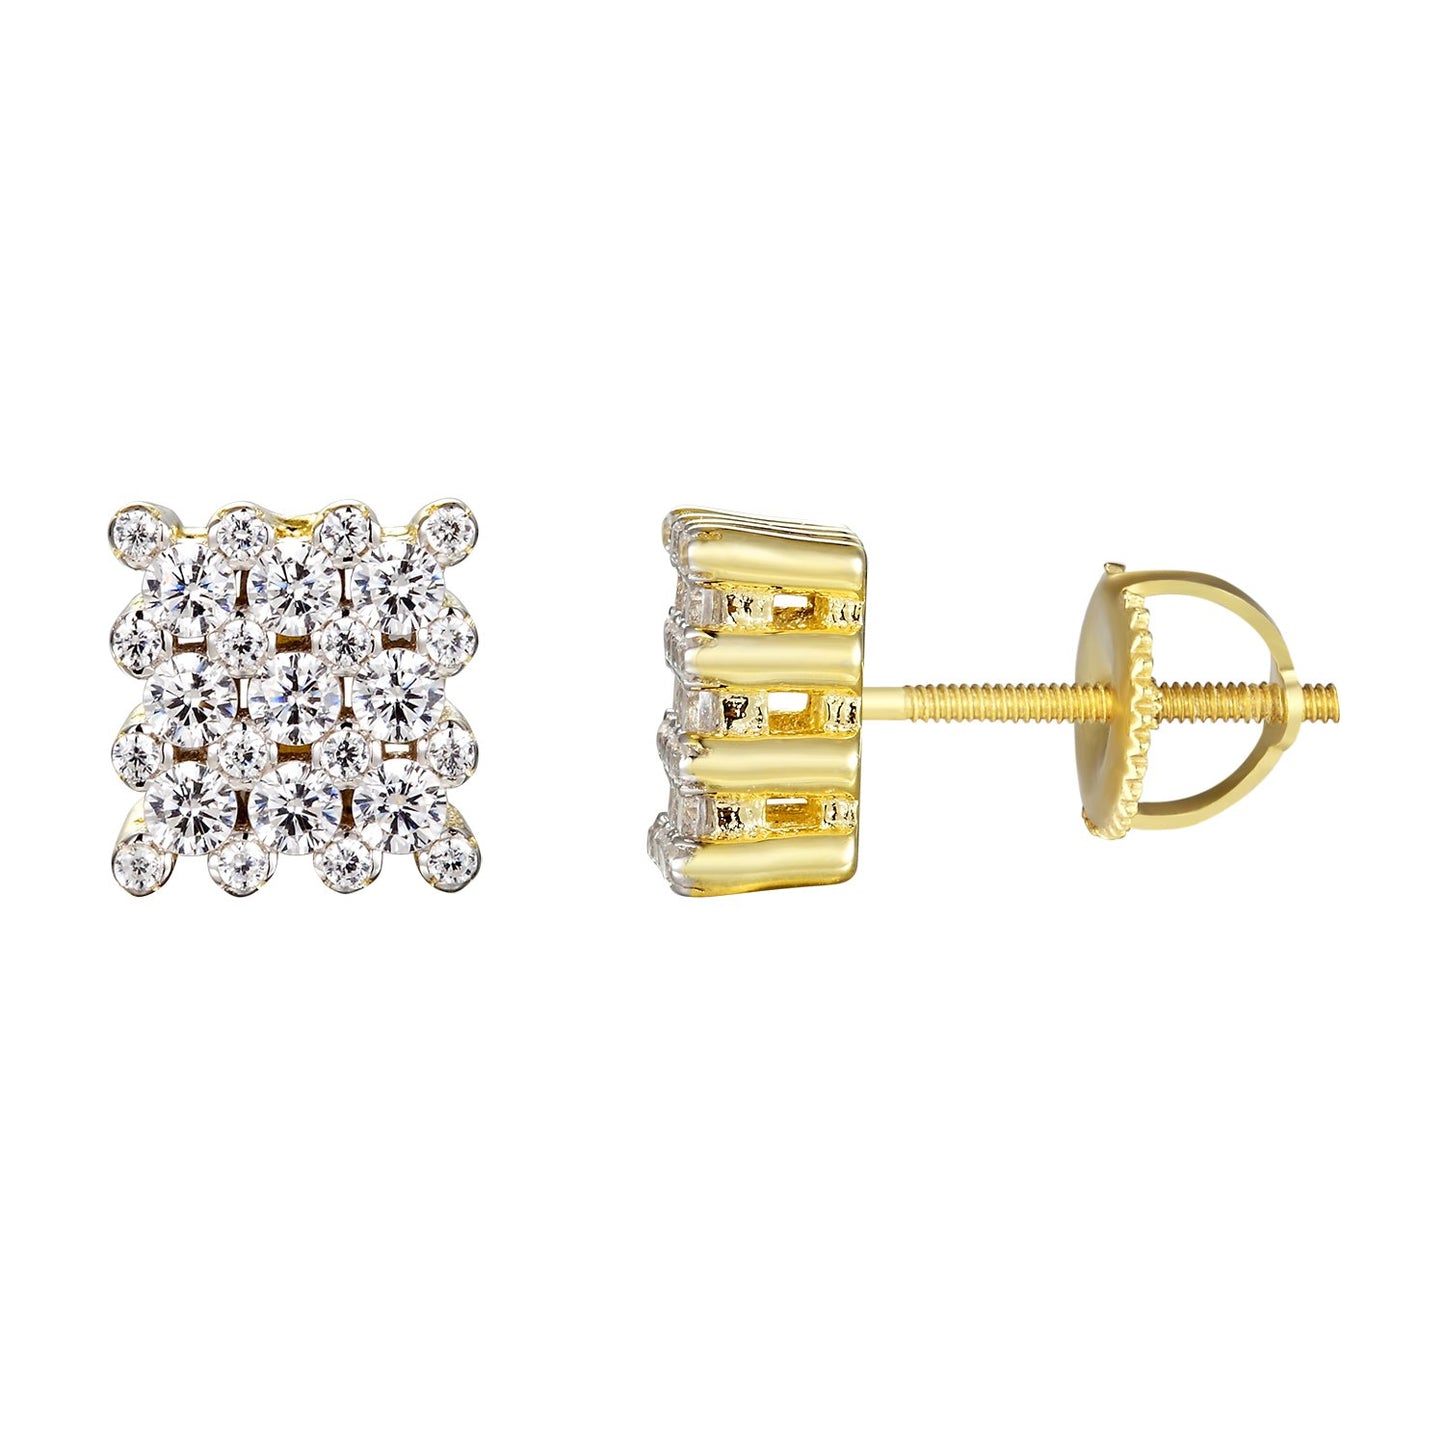 14k Gold Finish Square Silver Solitaire Stud Earrings